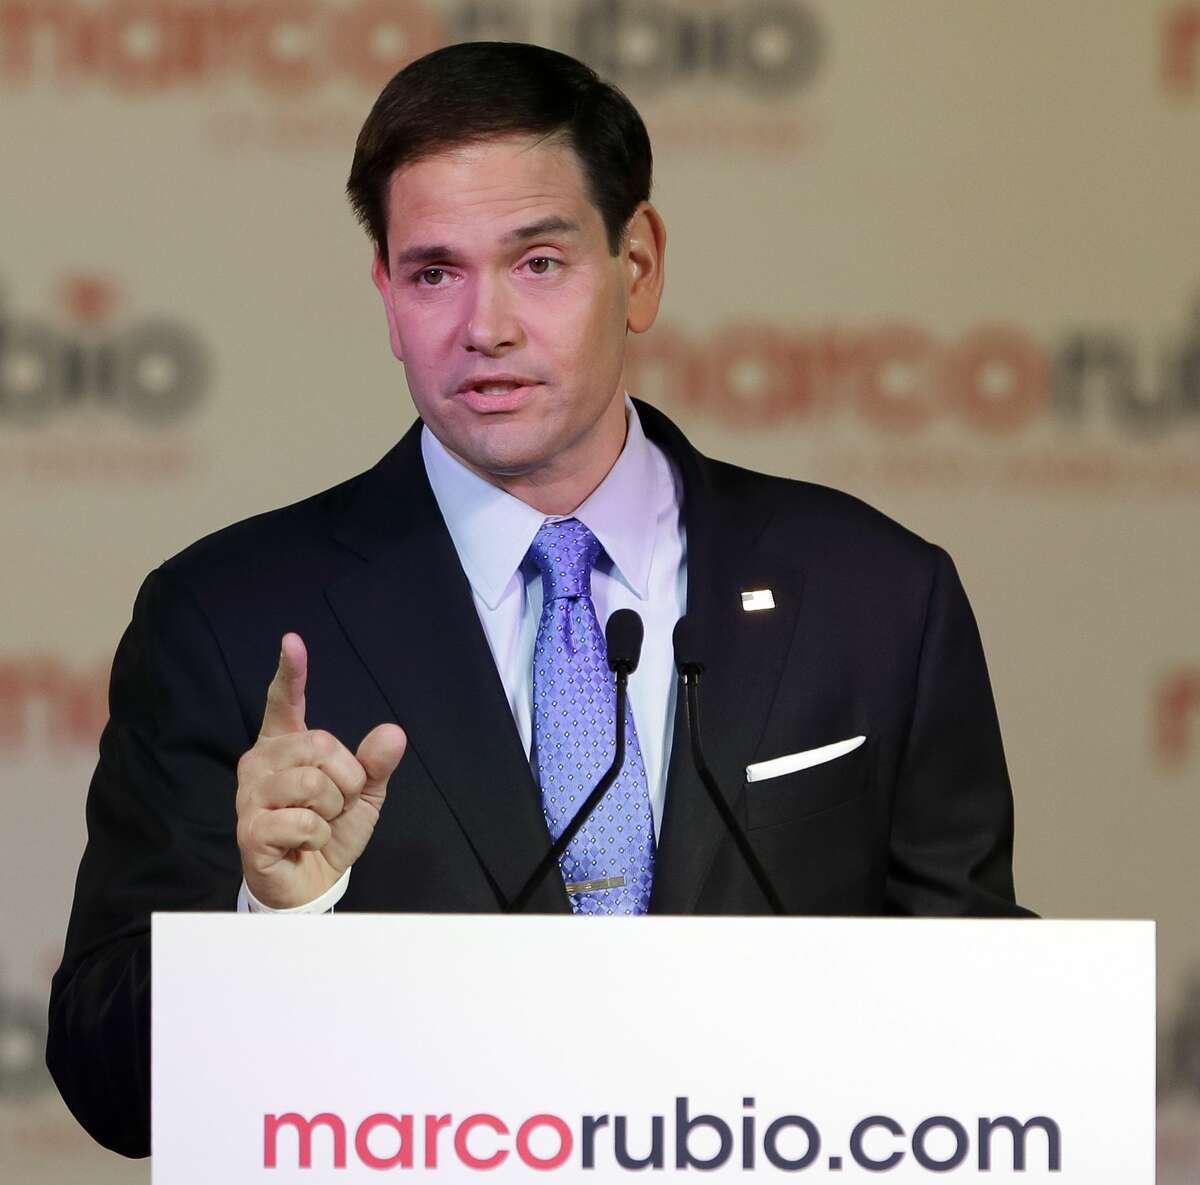 Florida Sen. Marco Rubio gestures as he announces that he is running for the Republican presidential nomination during a rally at the Freedom Tower, Monday, April 13, 2015, in Miami.